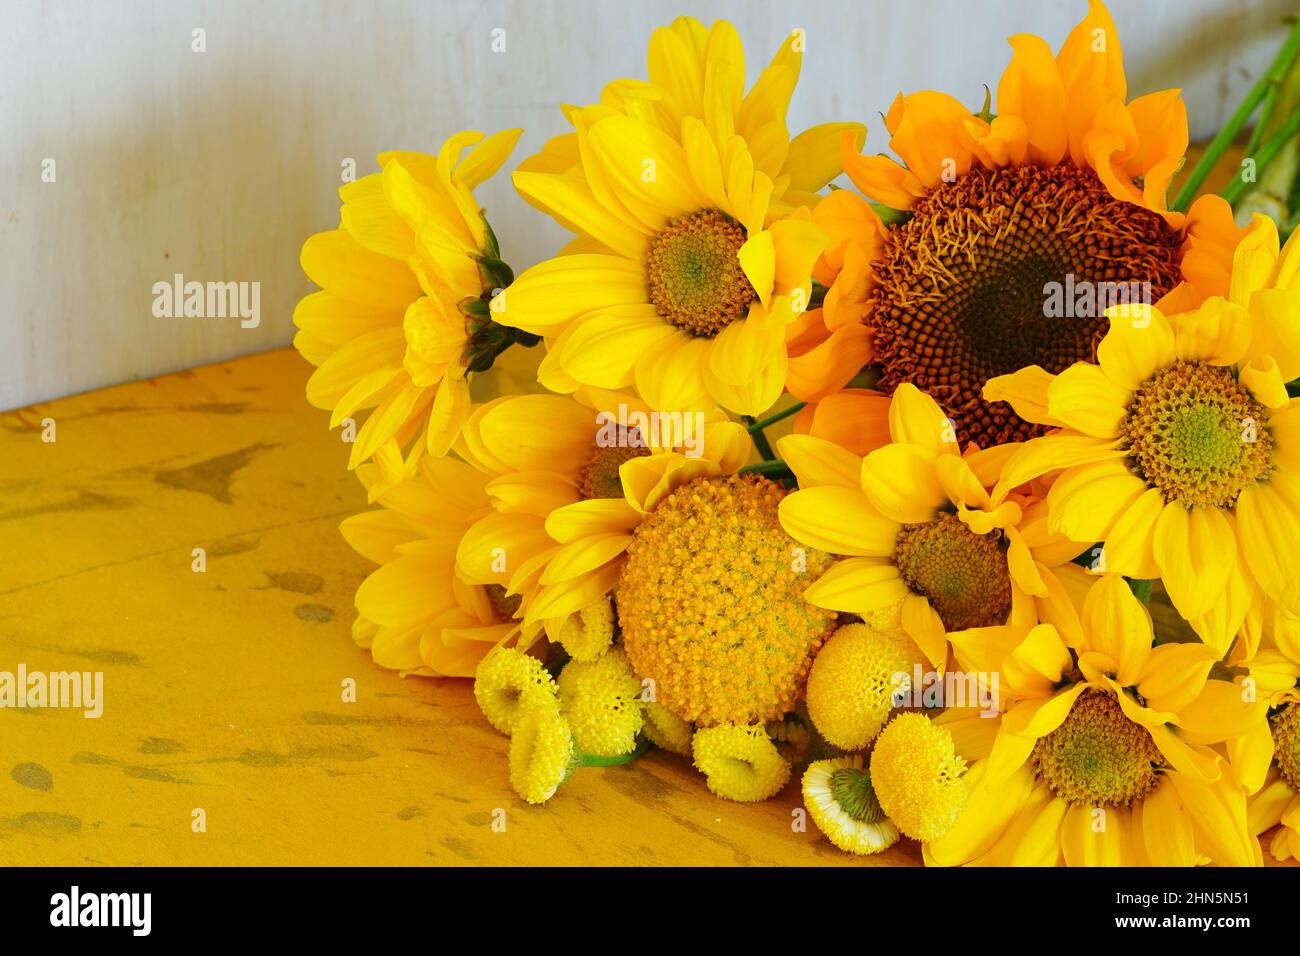 A bouquet of yellow flowers with craspedia, daisies and sunflowers Stock Photo